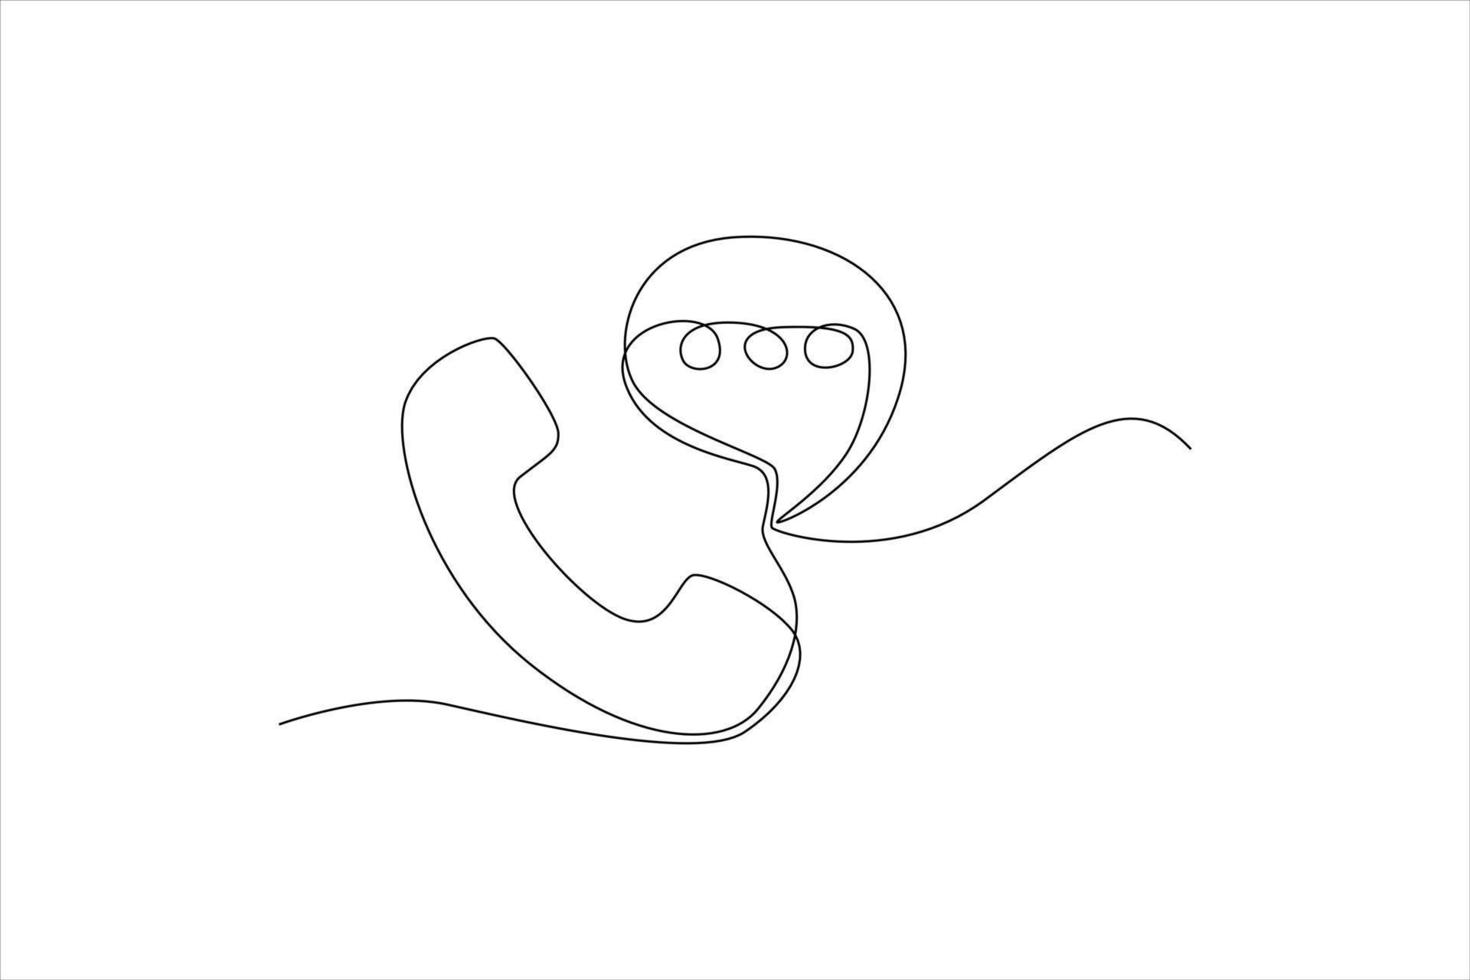 Single one line drawing call center icon and bubble talk. Customer service concept. Continuous line draw design graphic vector illustration.